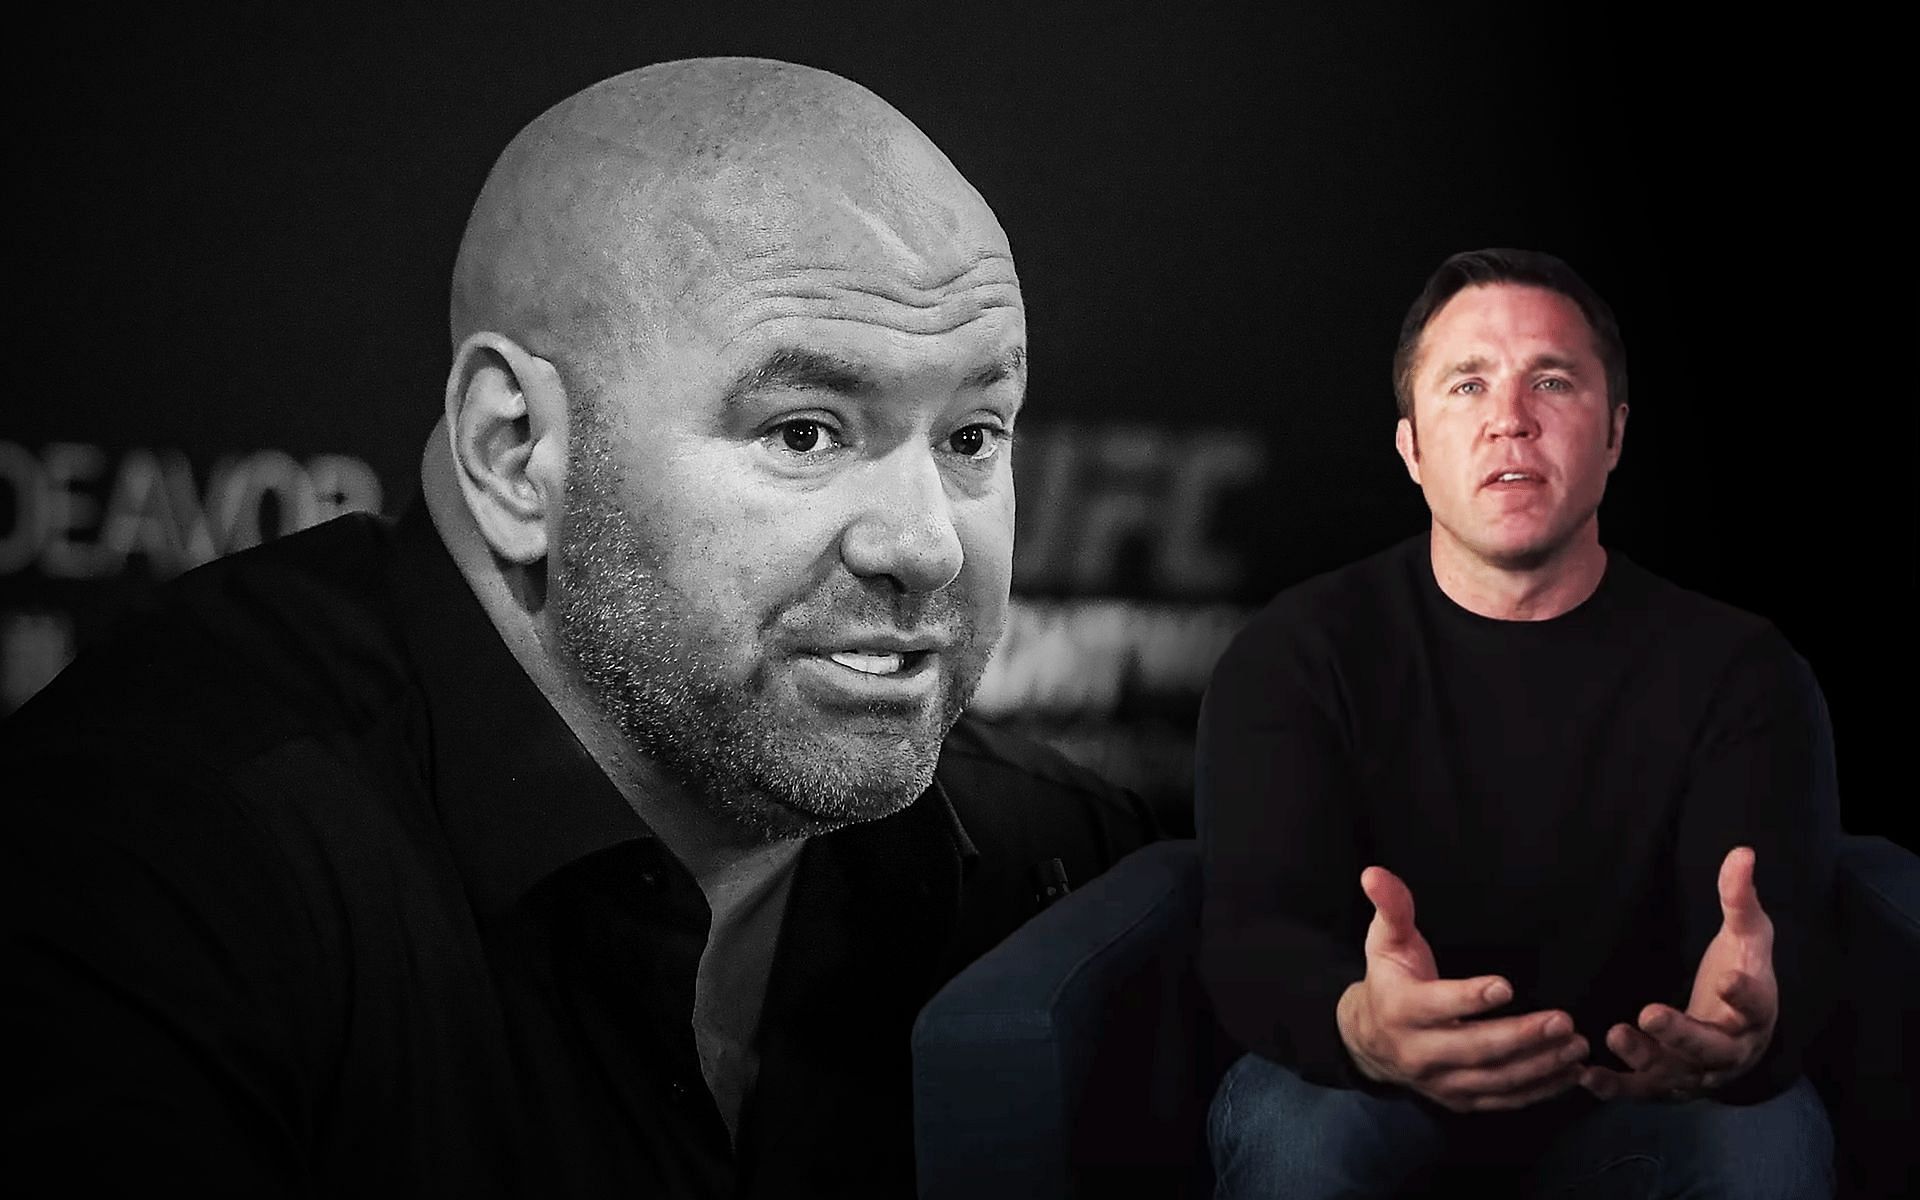 Chael Sonnen says Dana White changed his views on PEDs [Photo credit: YouTube.com]